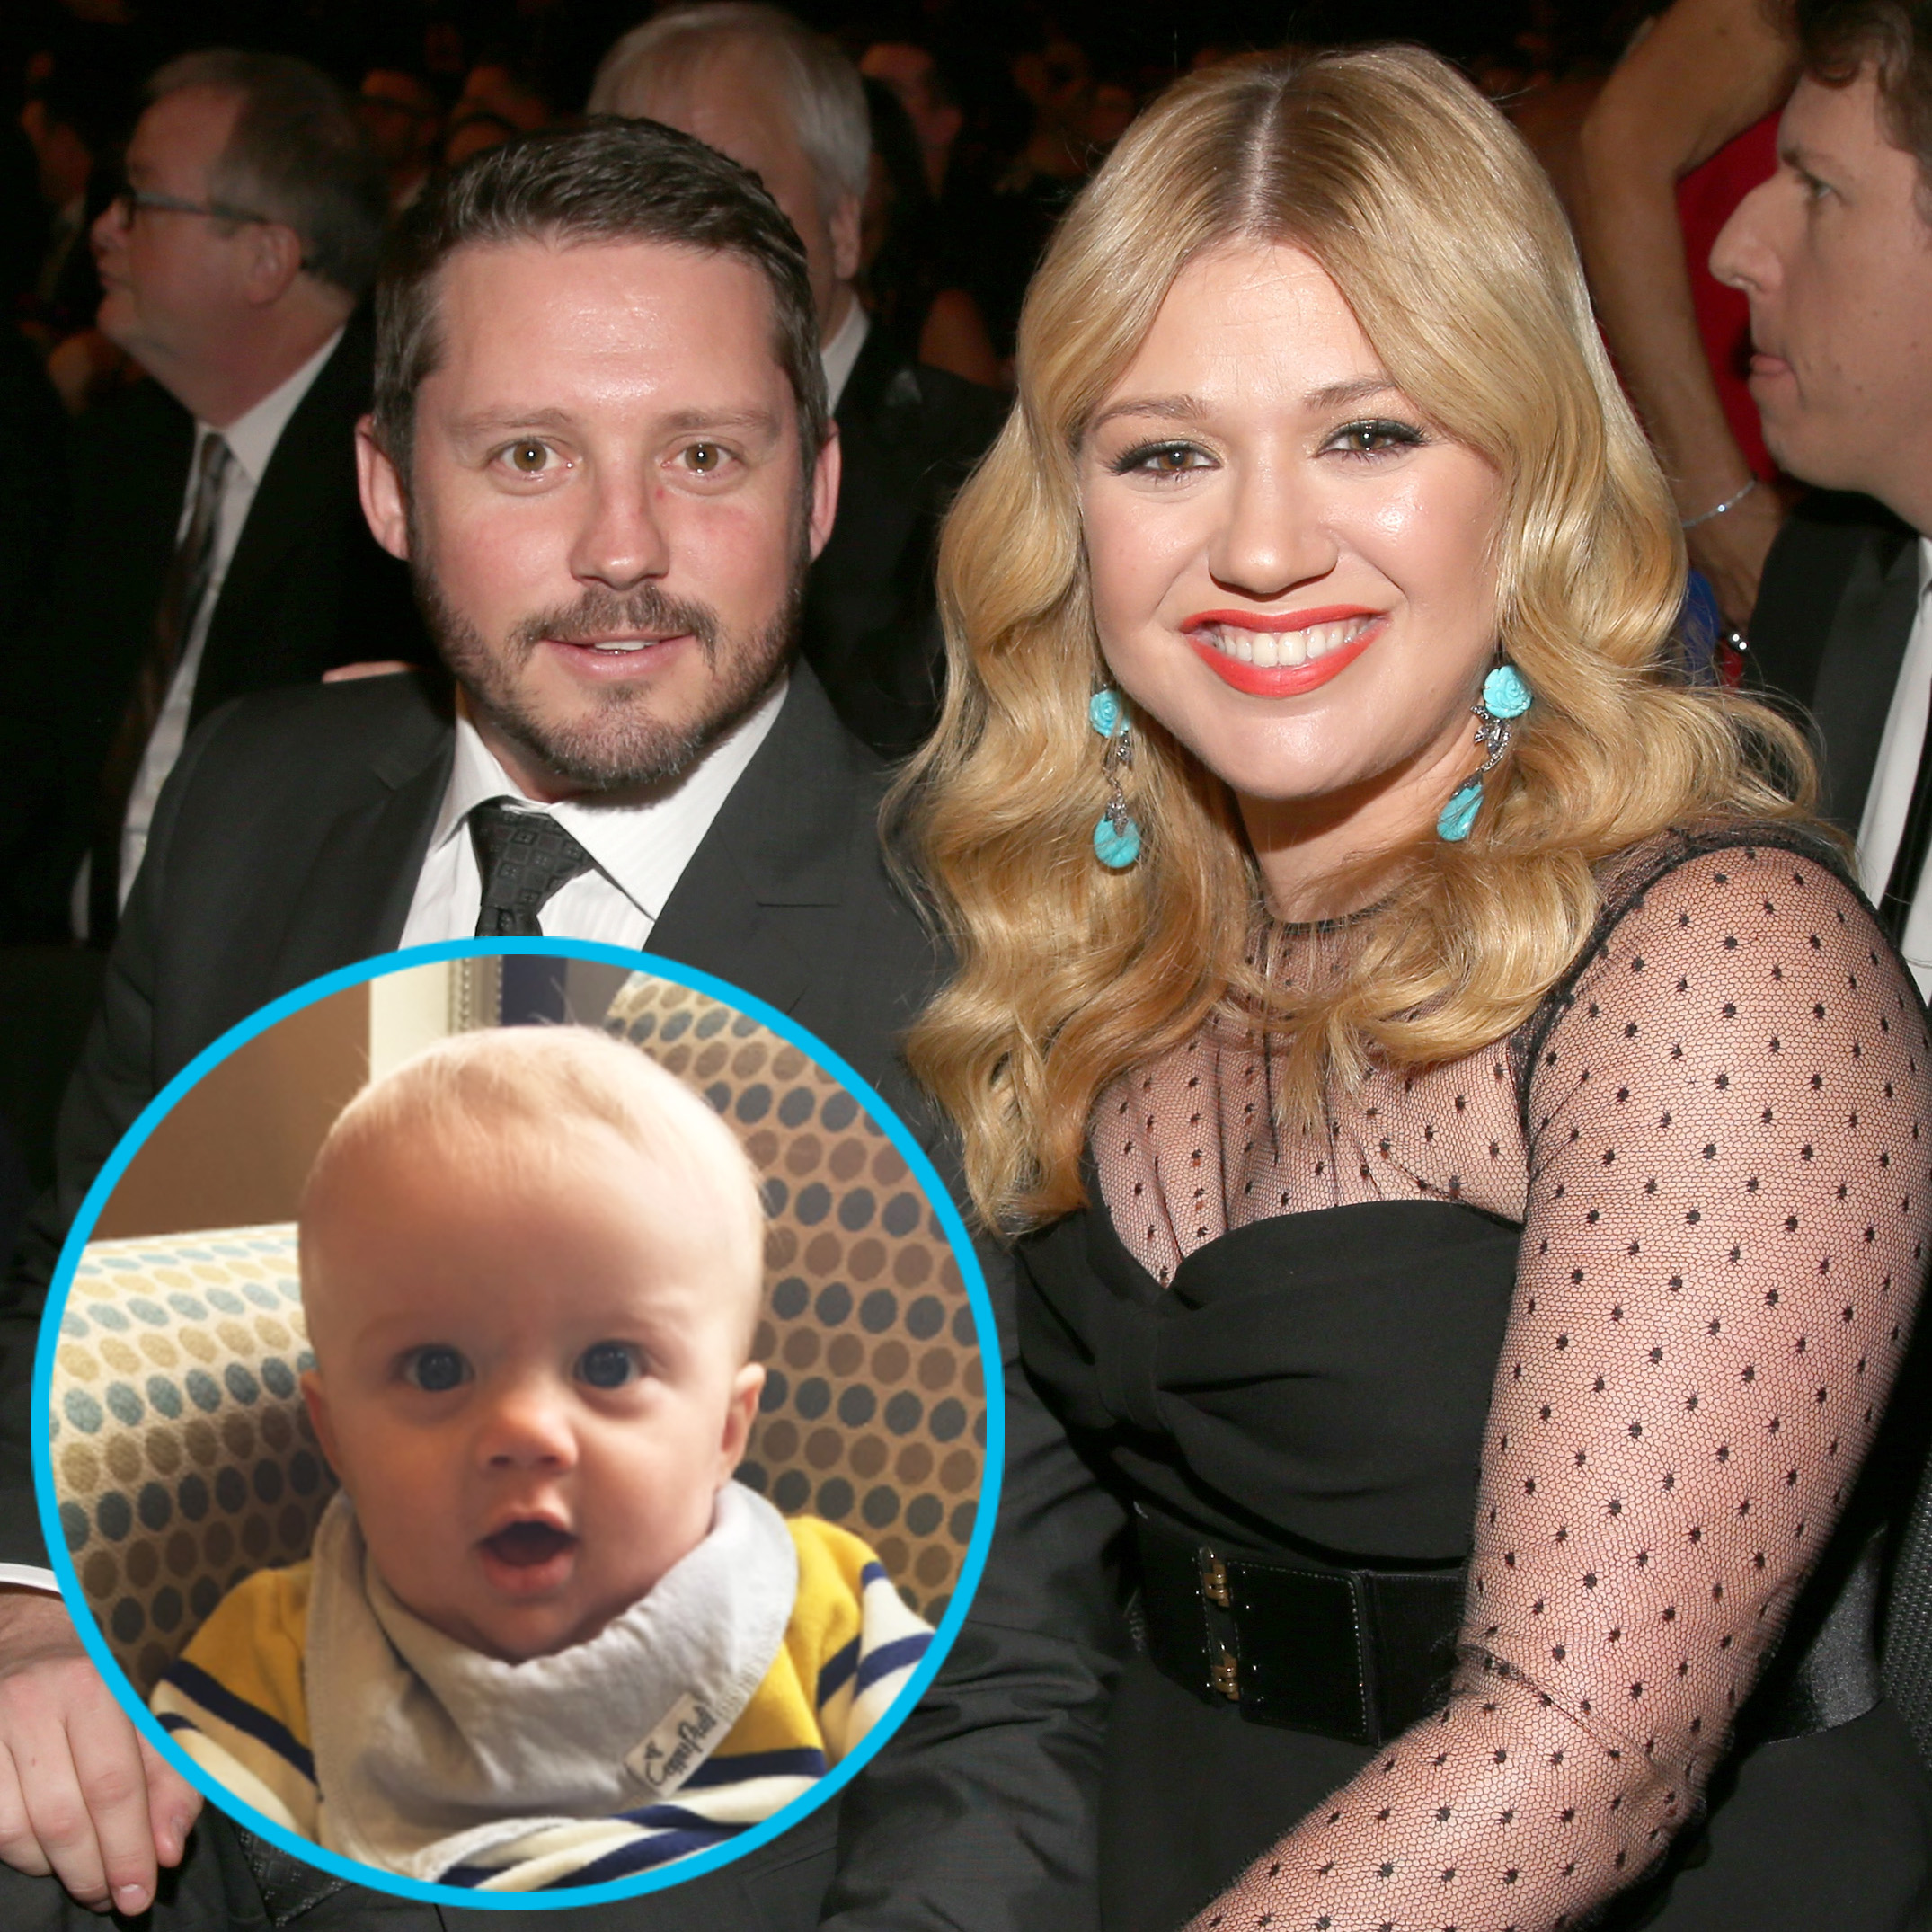 Amy married michael foster buble Michael Buble,